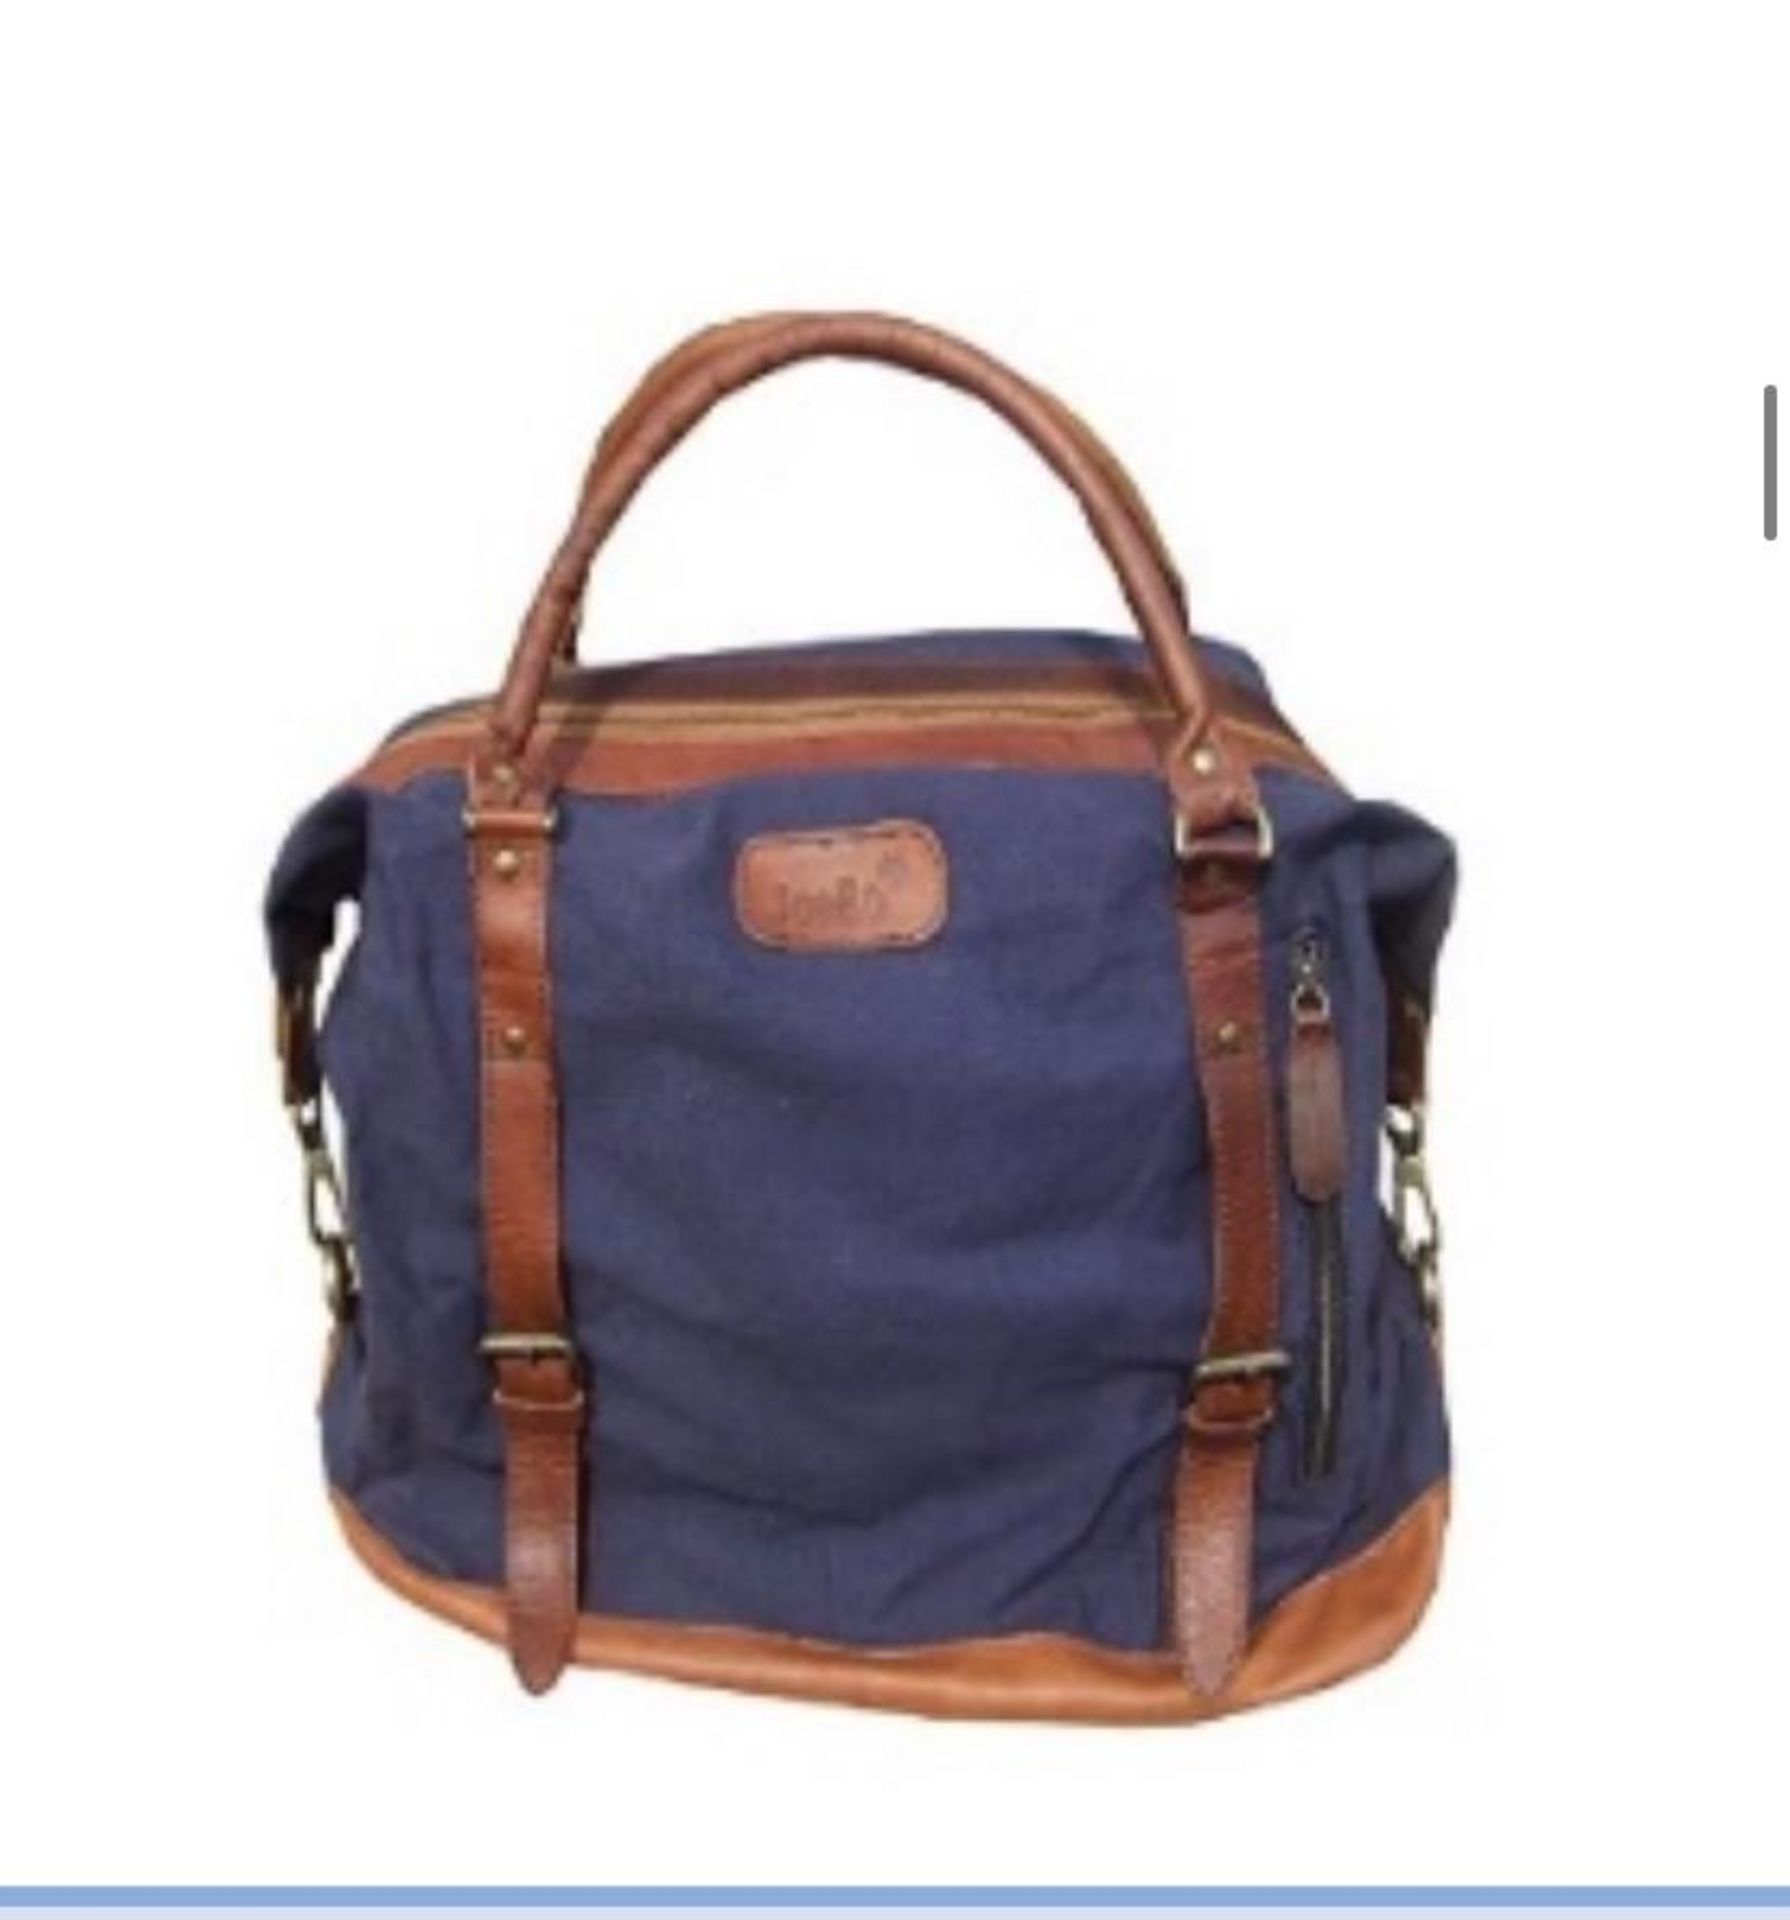 JOBO CANVAS AND LEATHER HOLDALL WEEKEND LEISURE SPORTS BAG